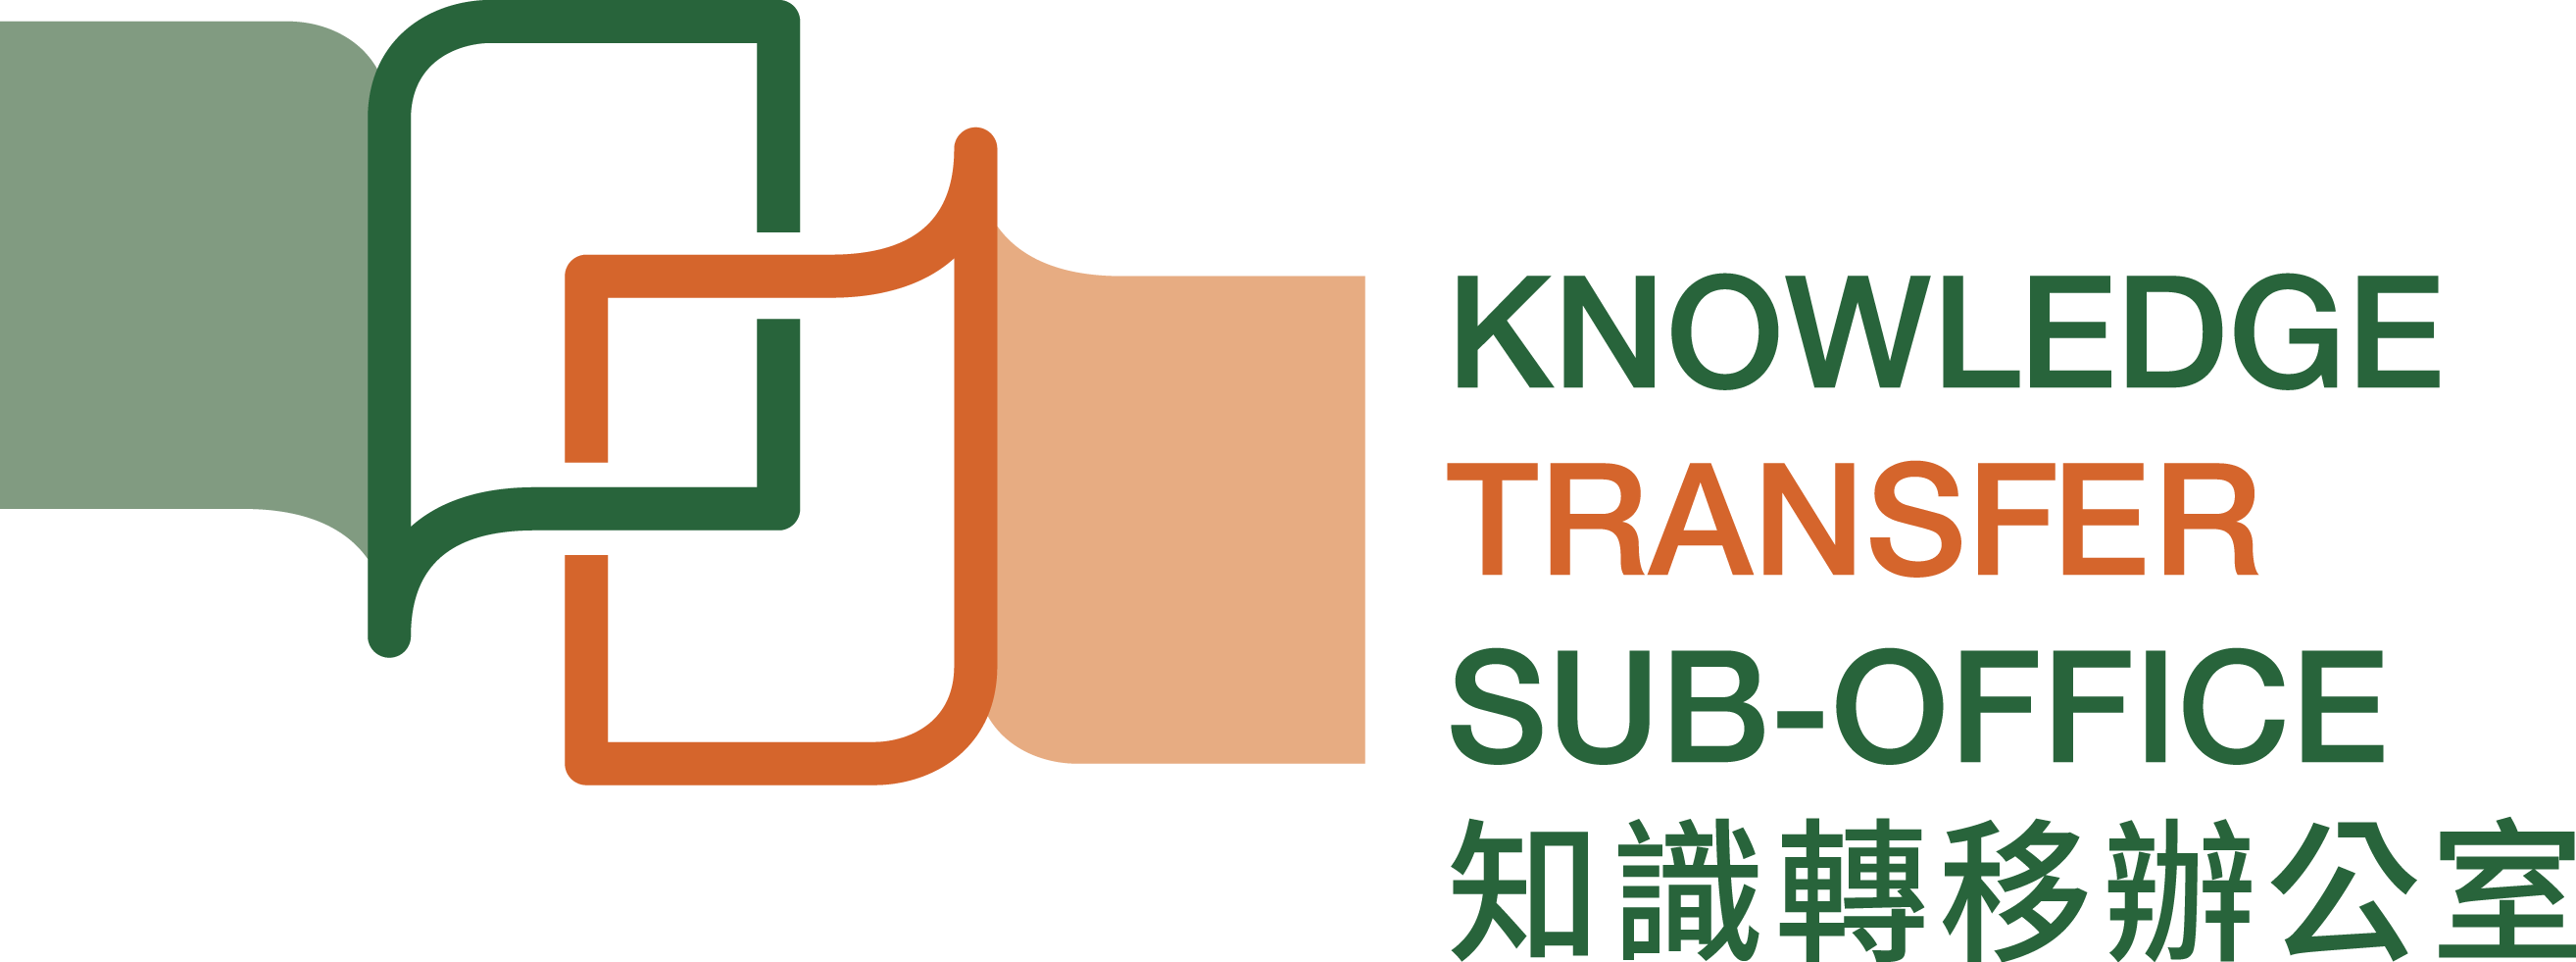 Knowledge Transfer Sub-office